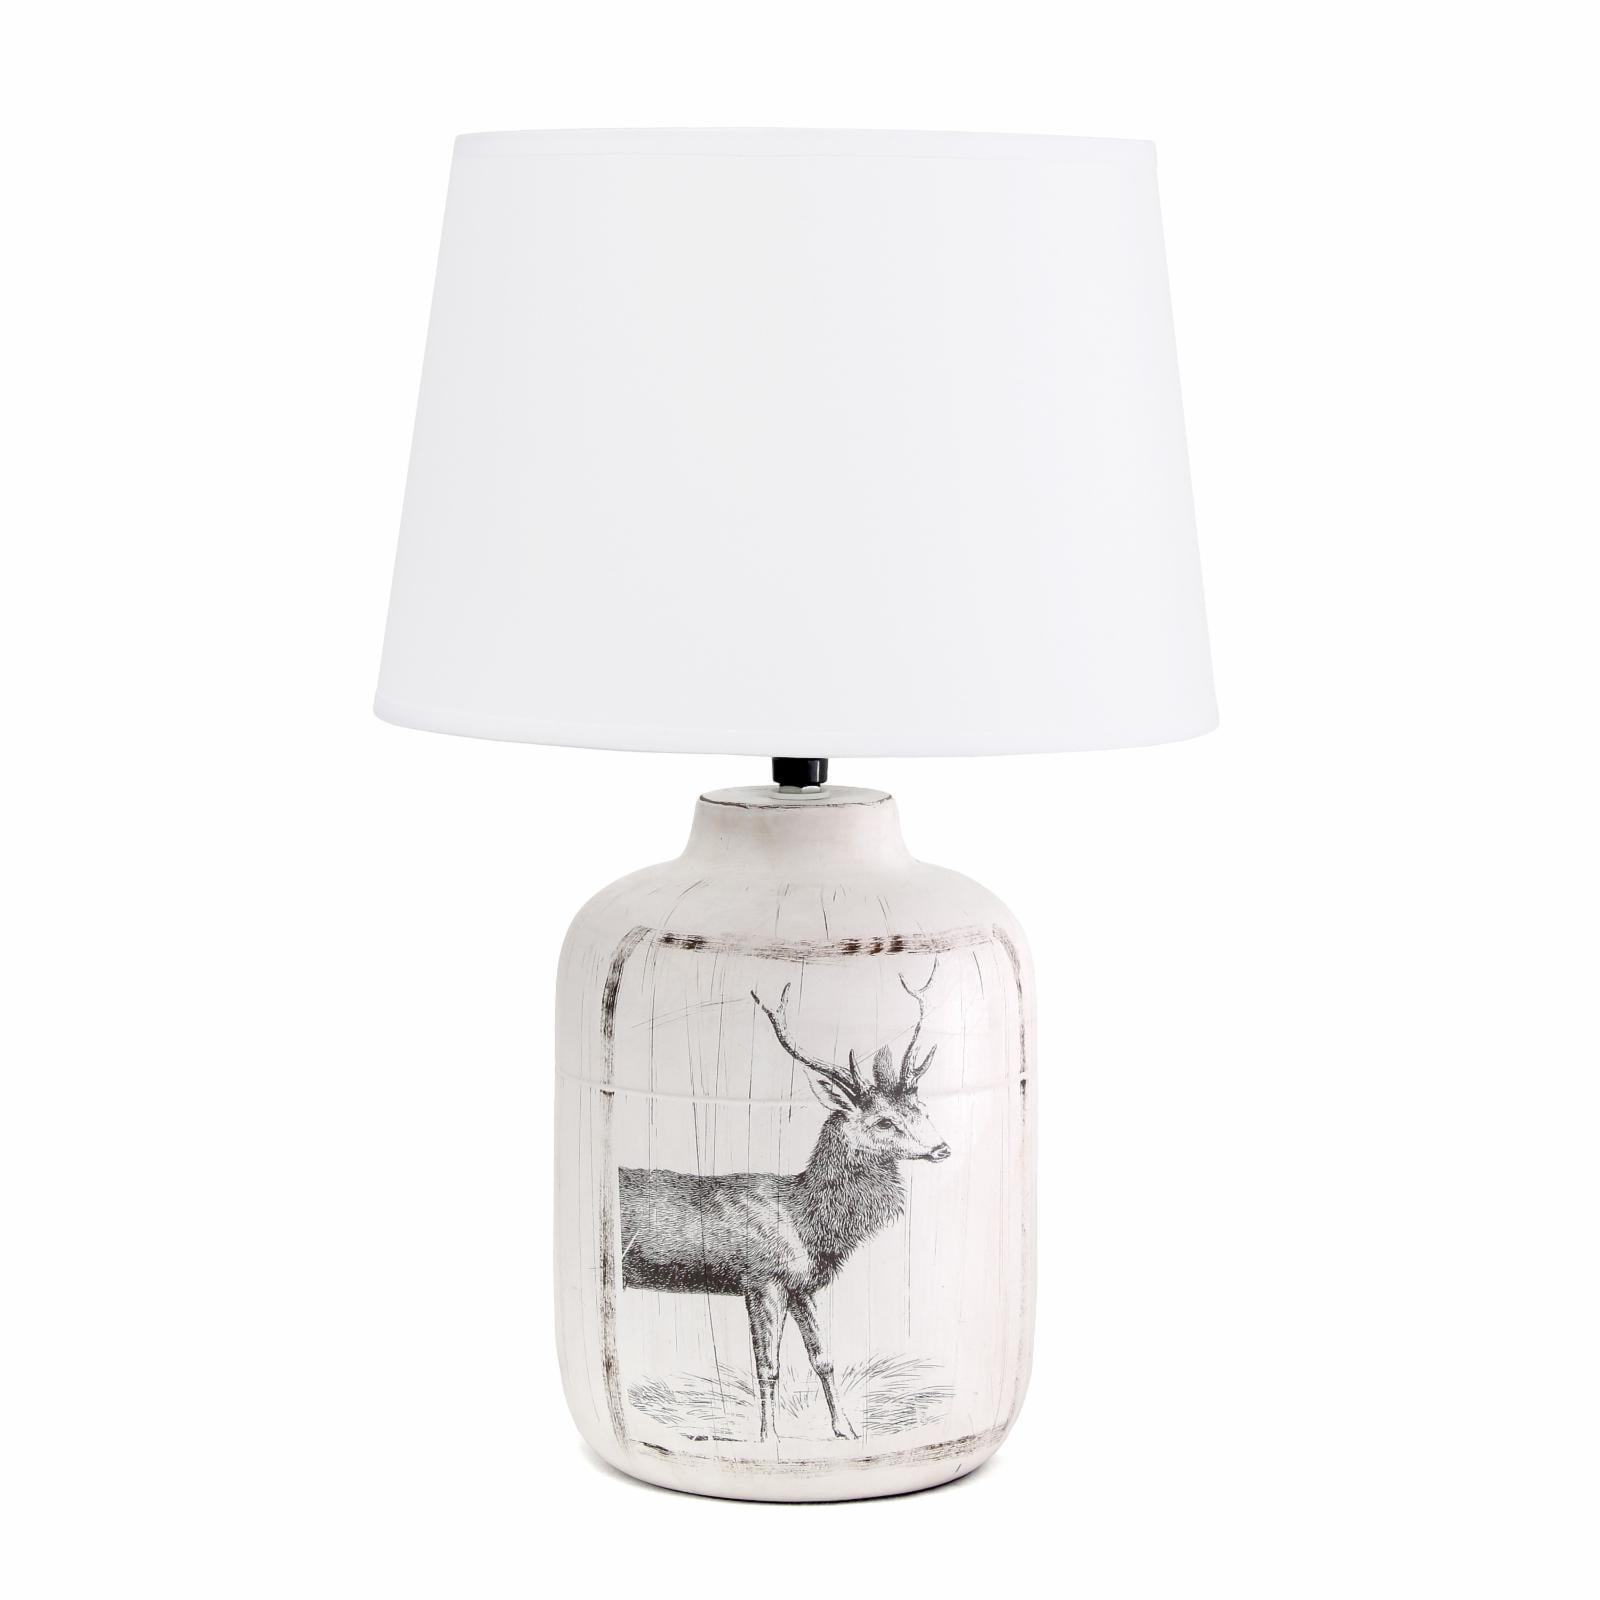 Lt1065-der Rustic Deer Buck Nature Printed Ceramic Farmhouse Accent Table Lamp With Fabric Shade